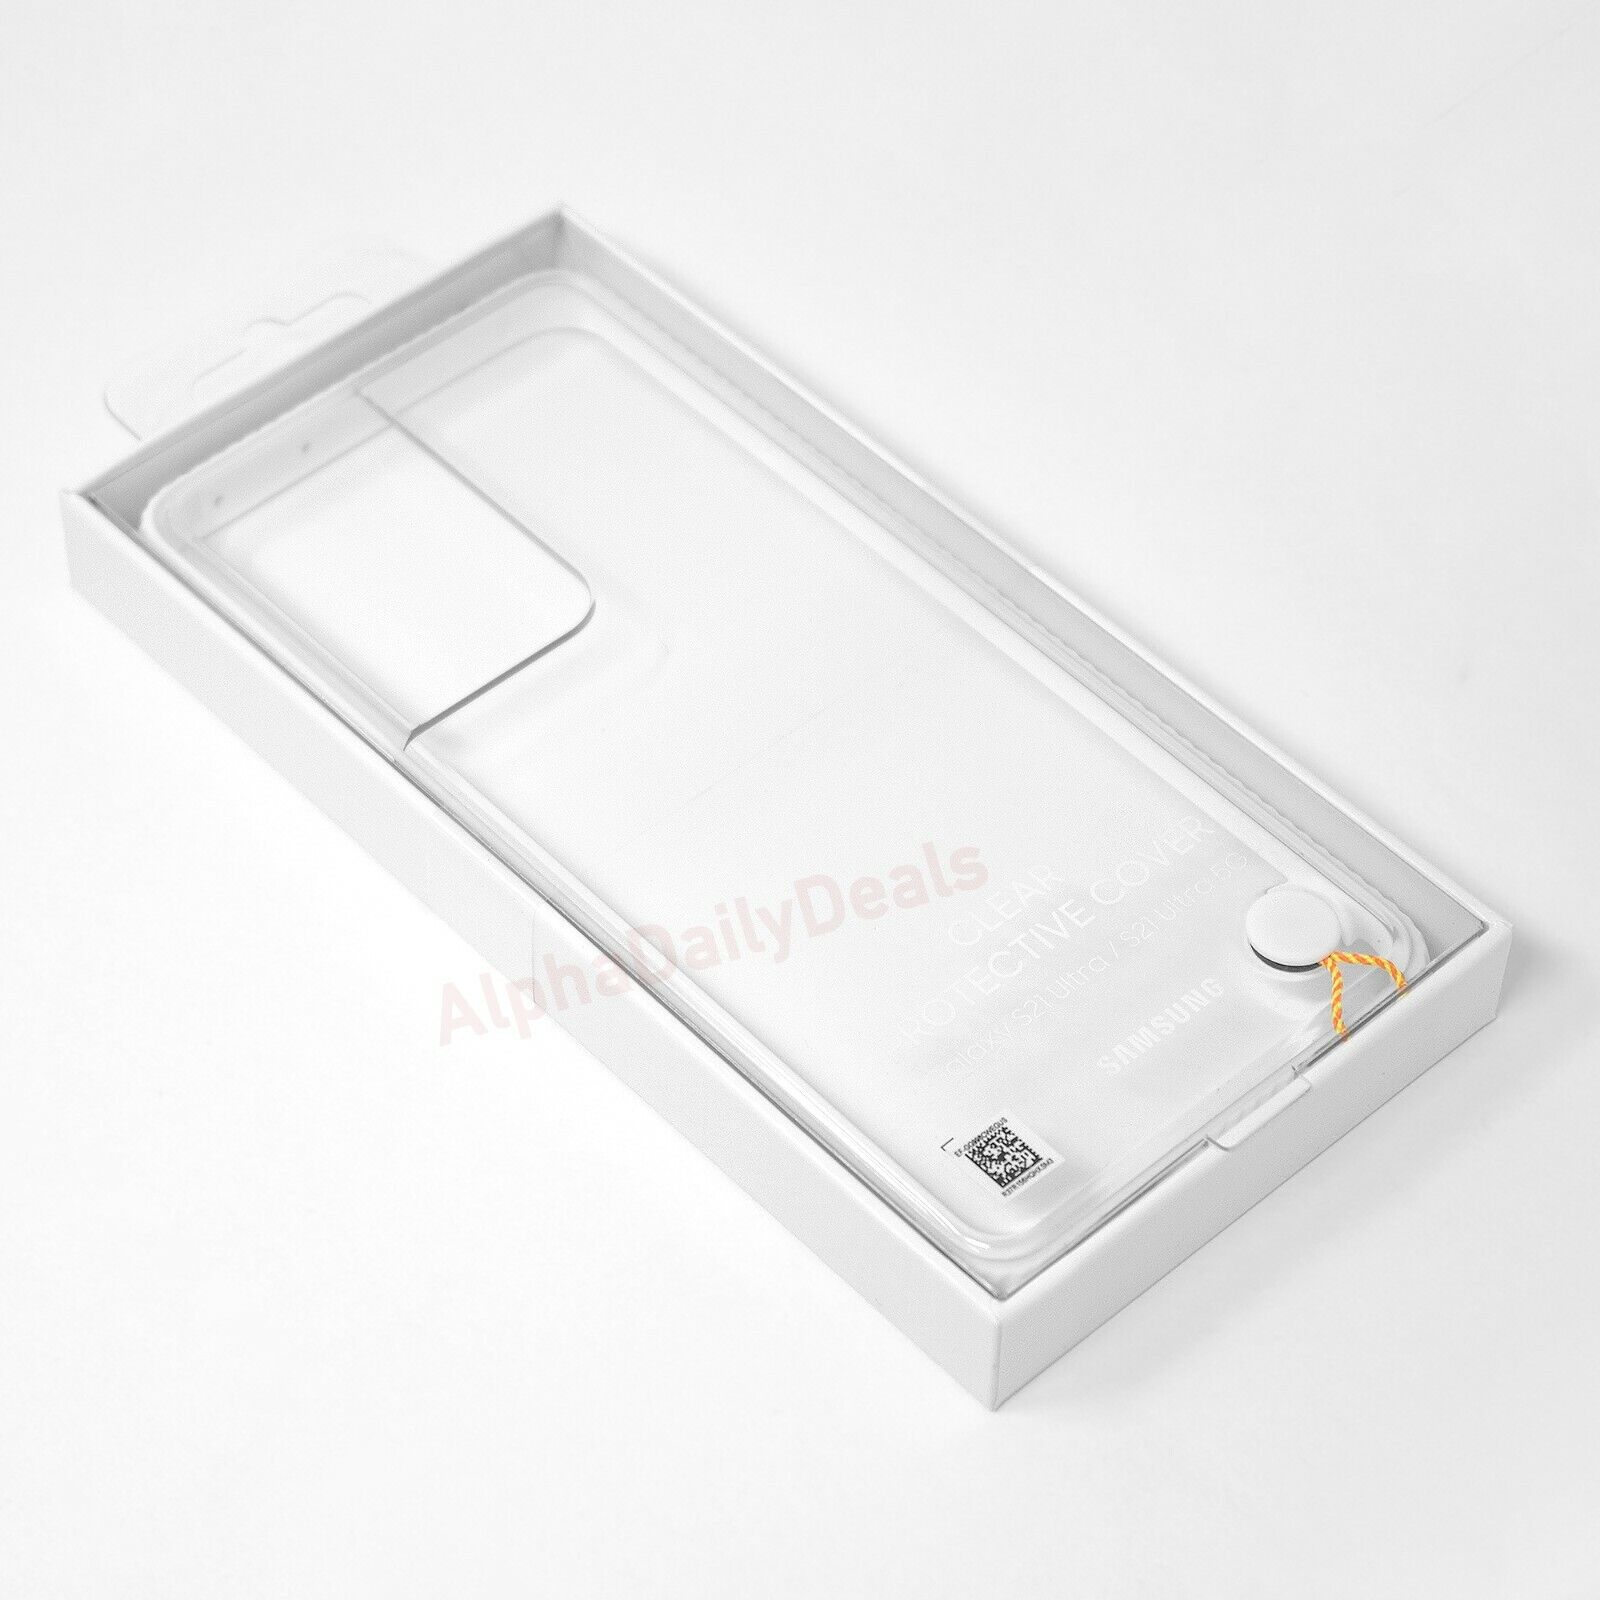 Genuine OEM Samsung Galaxy S21 Ultra 5G Clear Protective Cover Case